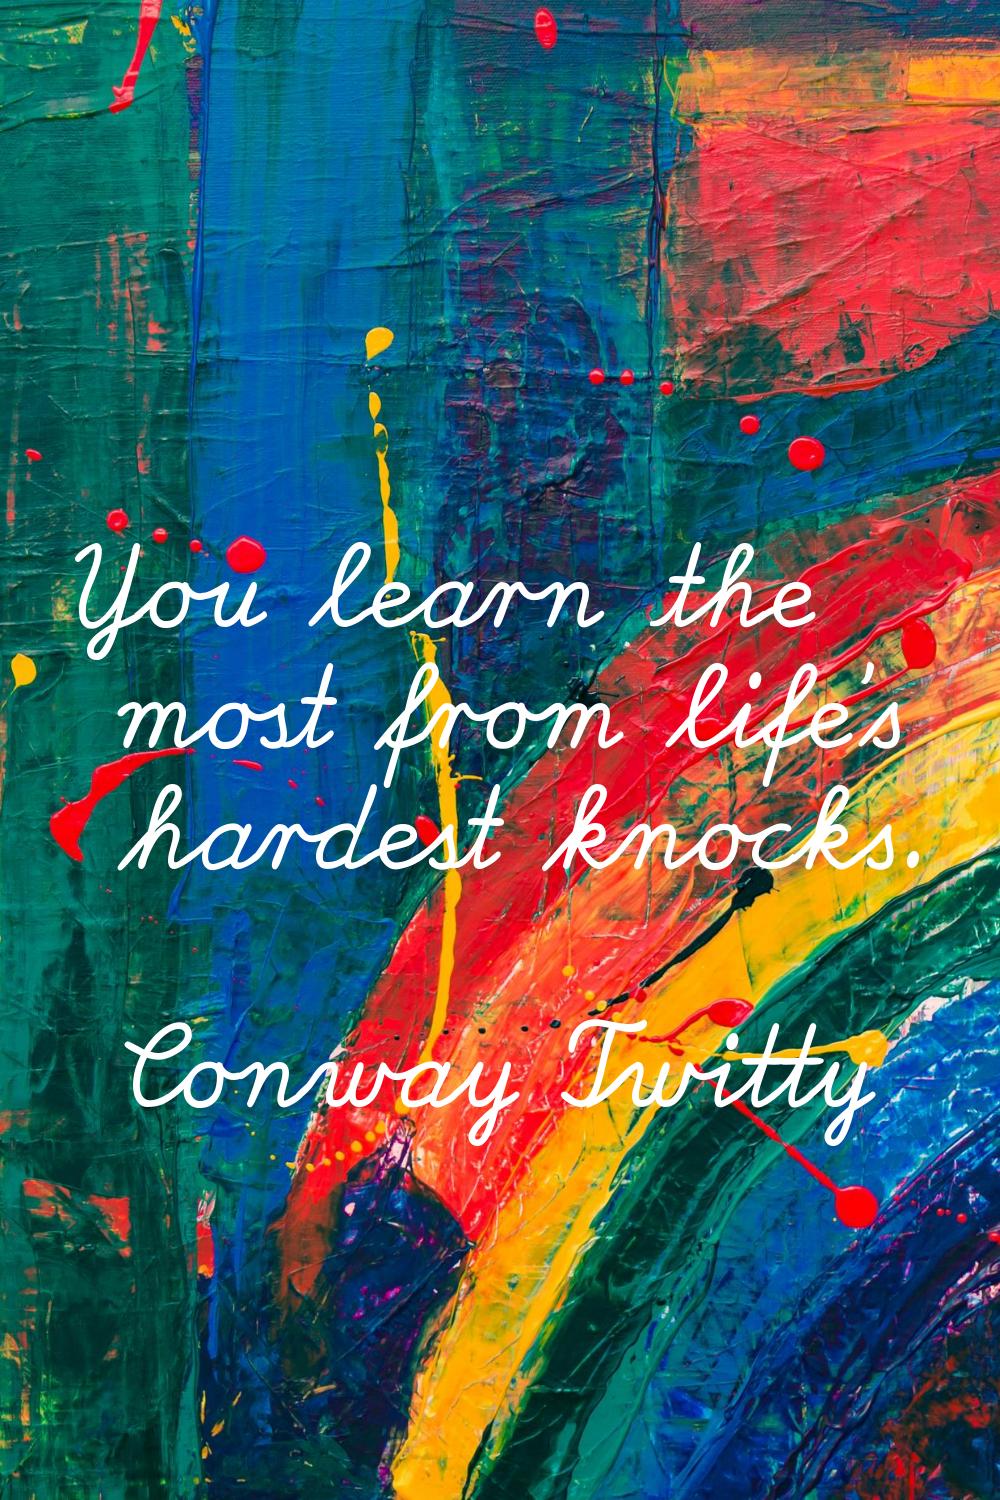 You learn the most from life's hardest knocks.